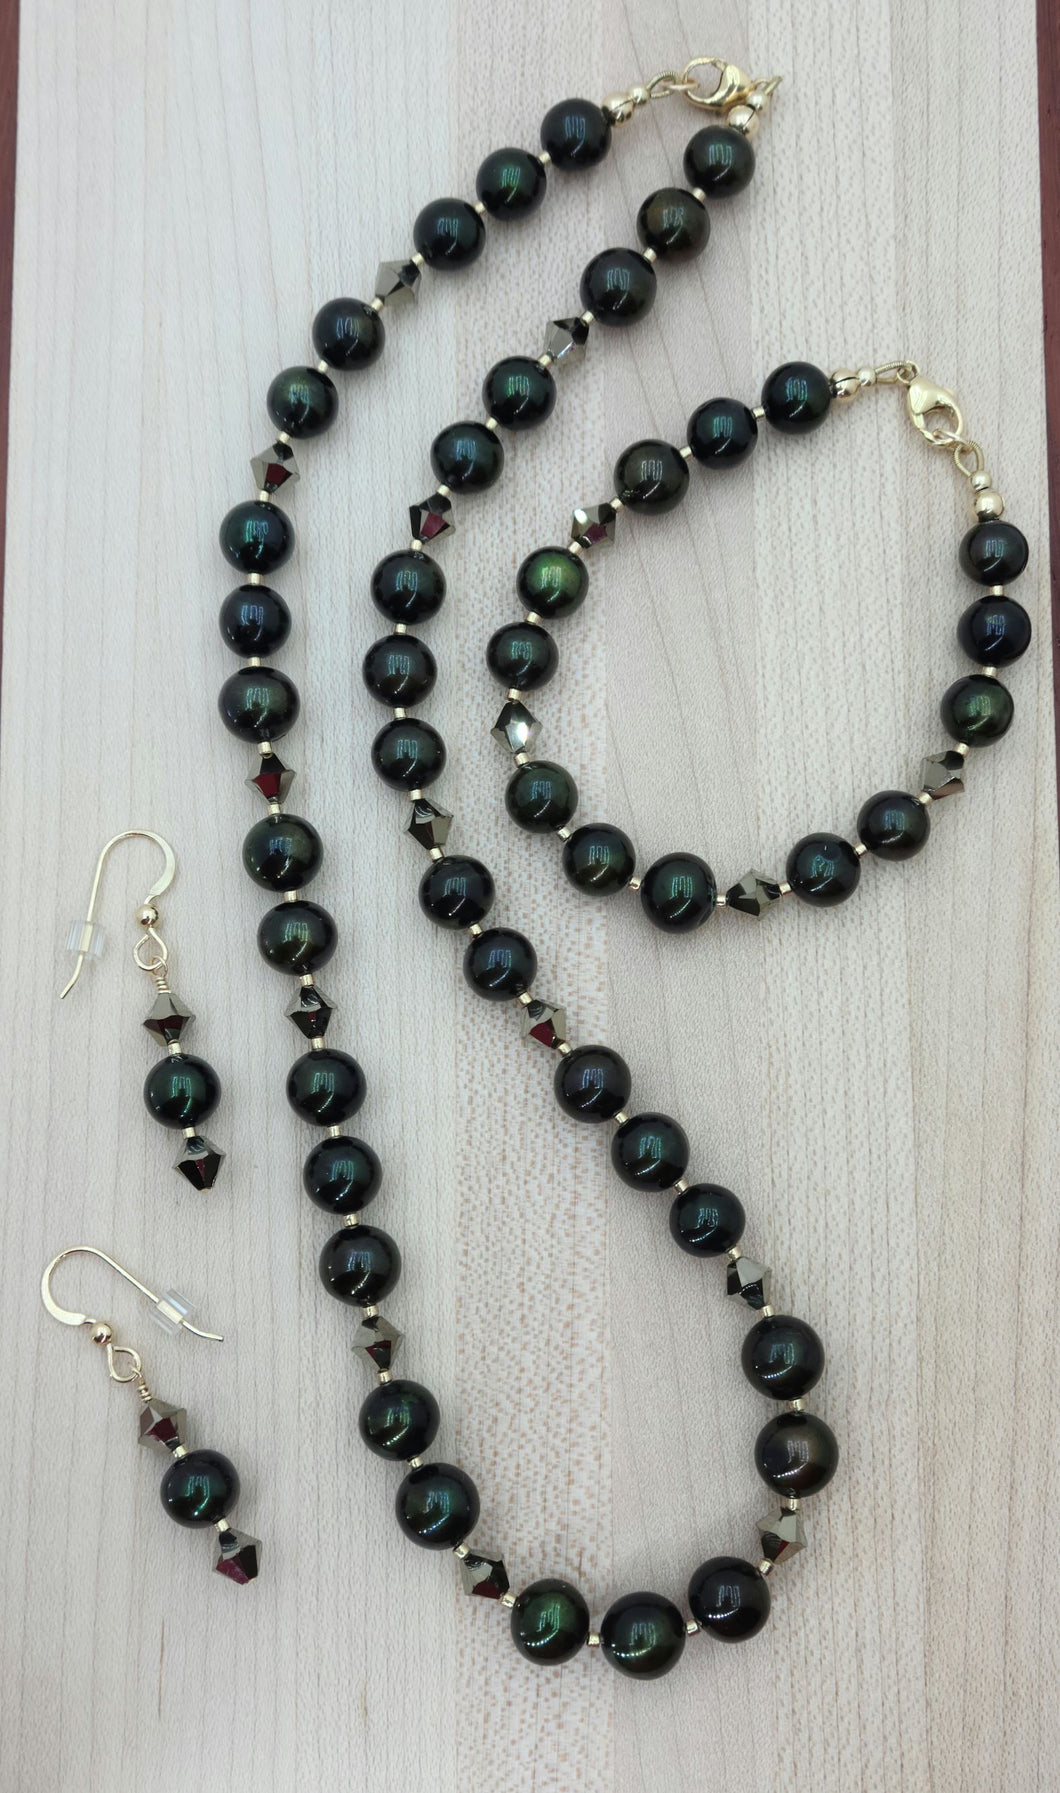 Very nice deep green pearls, aurum (latin for gold) crystals, champagne Miyuki delica, & gold filled findings necklace, bracelet, earrings